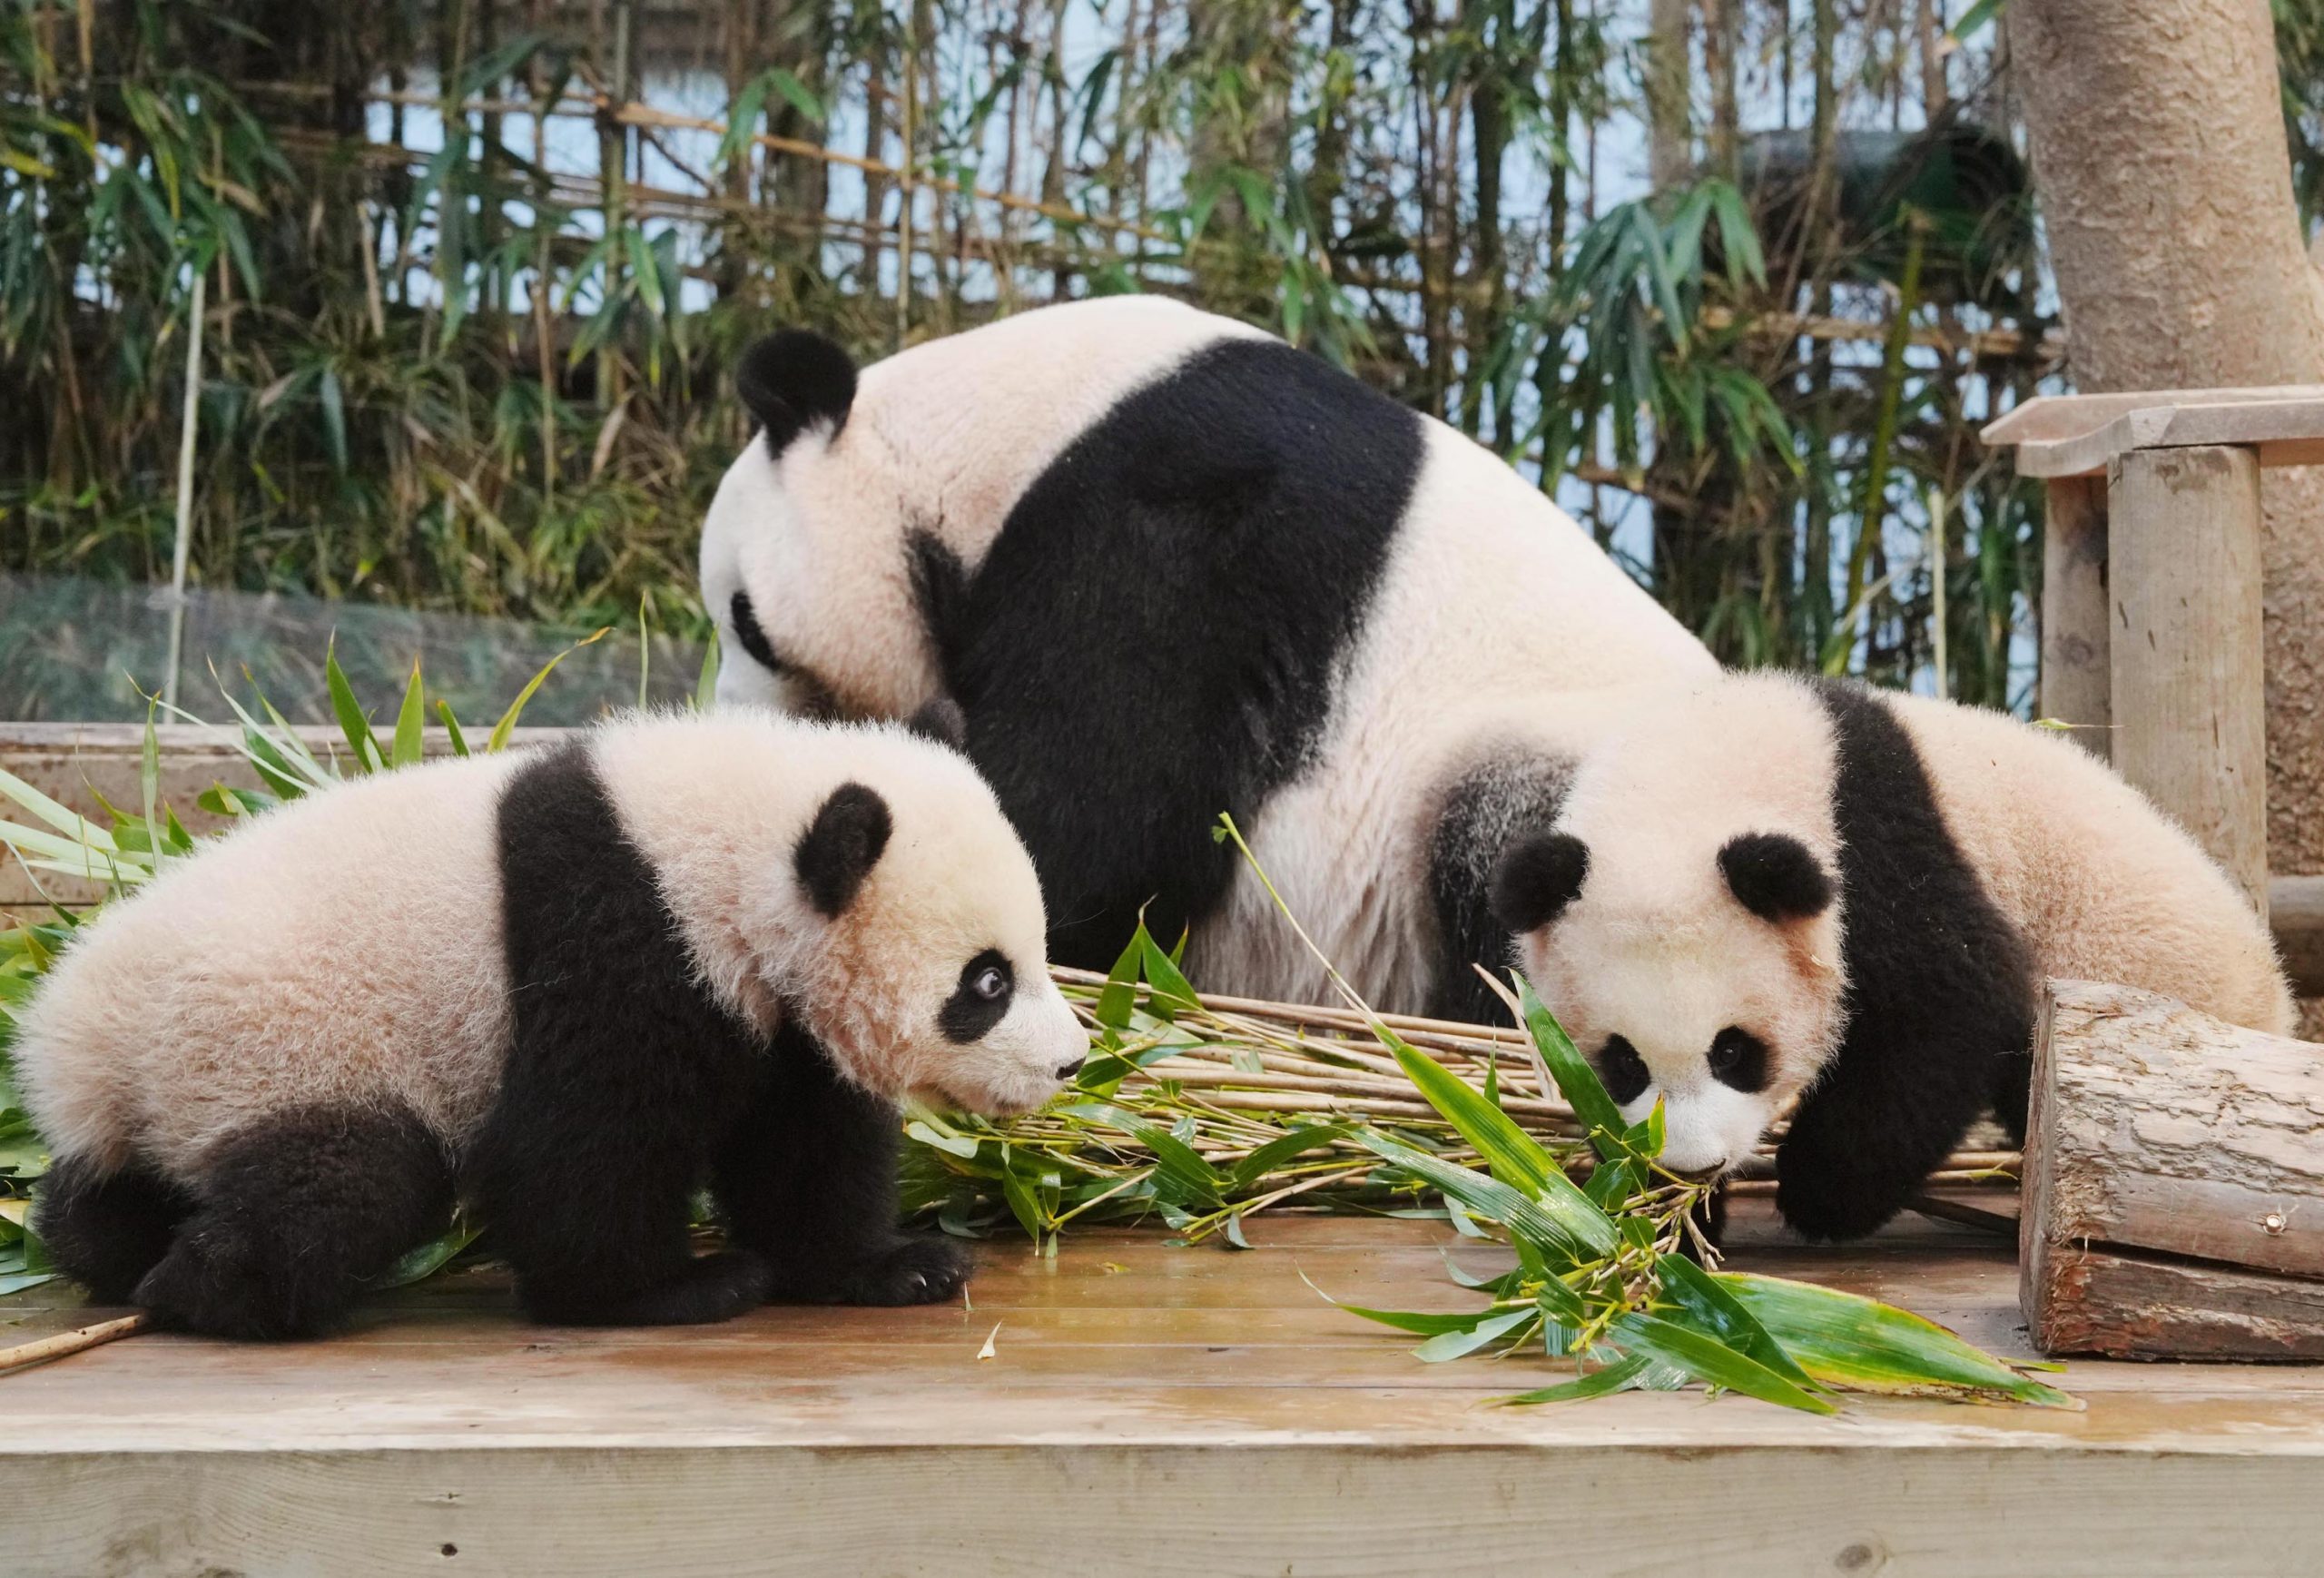 Hui Bao and Lui Bao pay some attention to fresh stalks of bamboo.